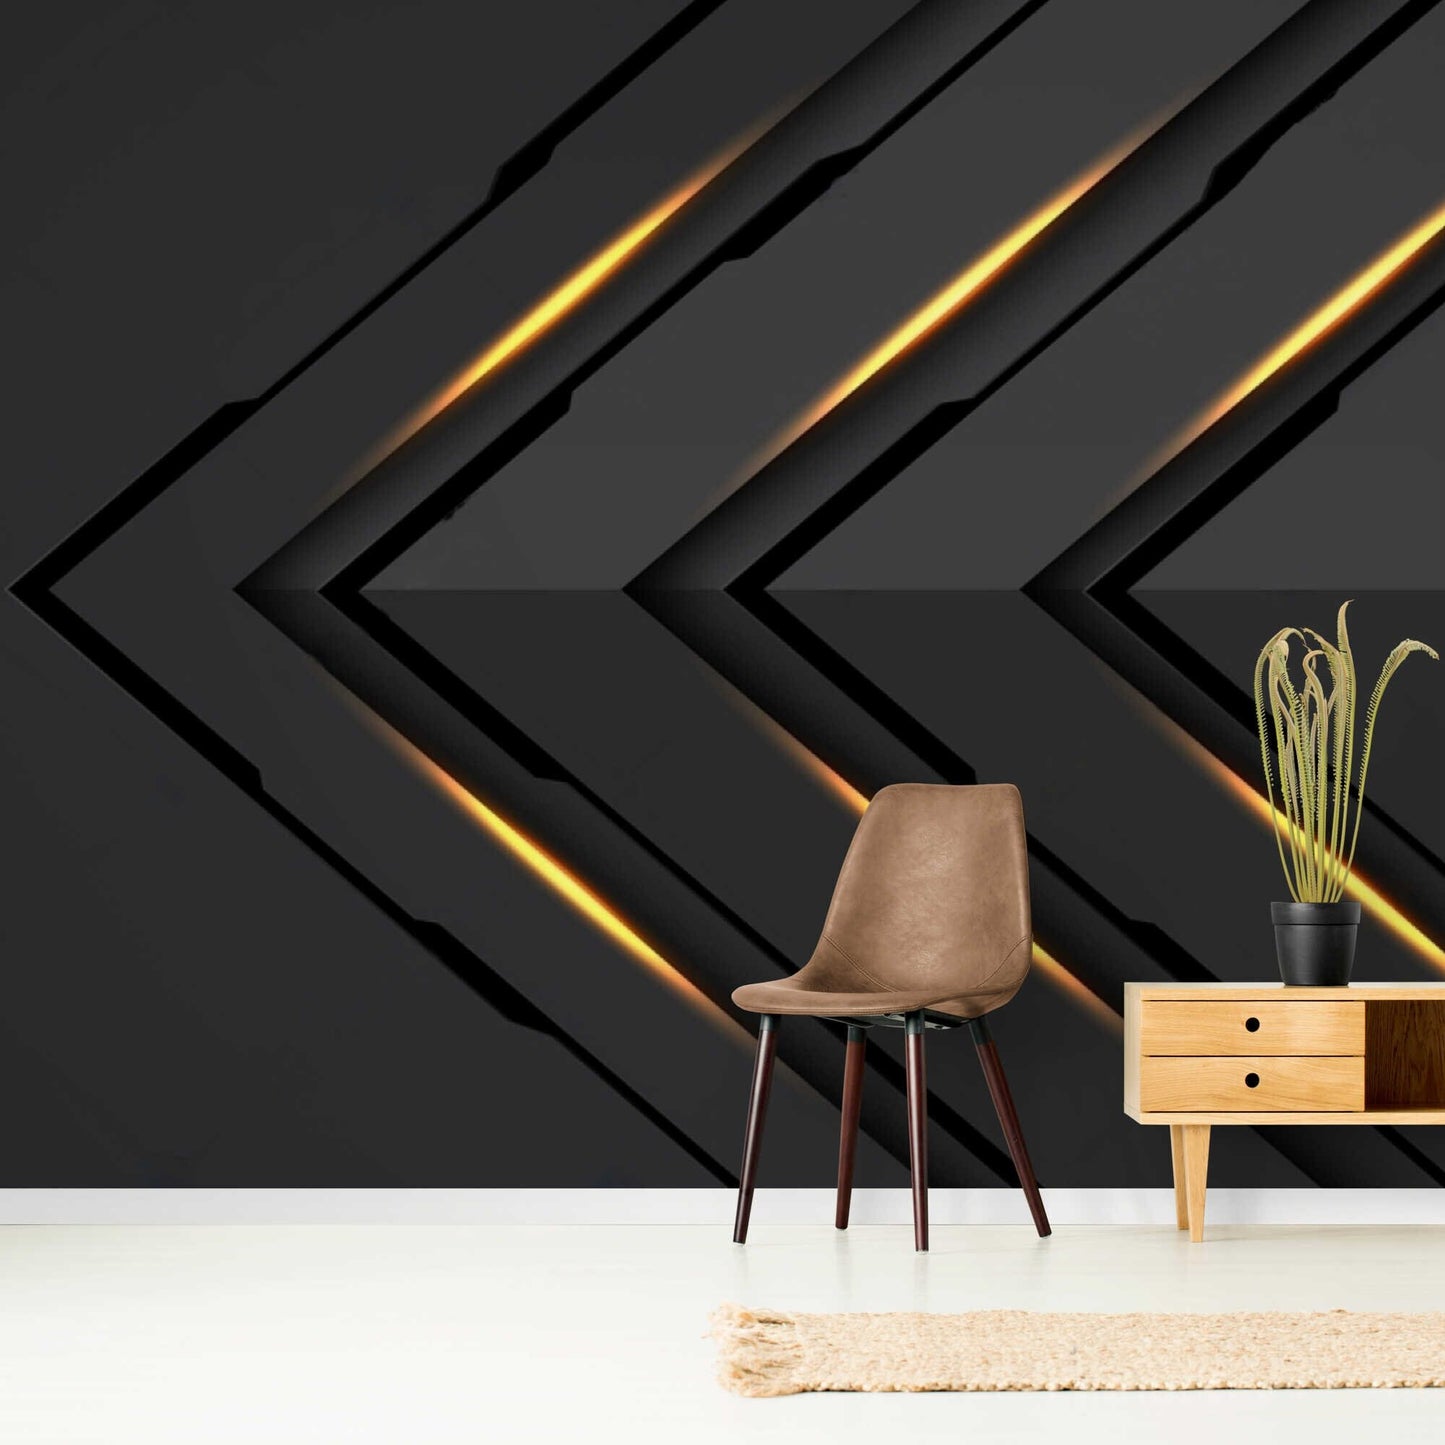 Dark gray 3D wallpaper with gold neon lights creating a glamorous ambiance